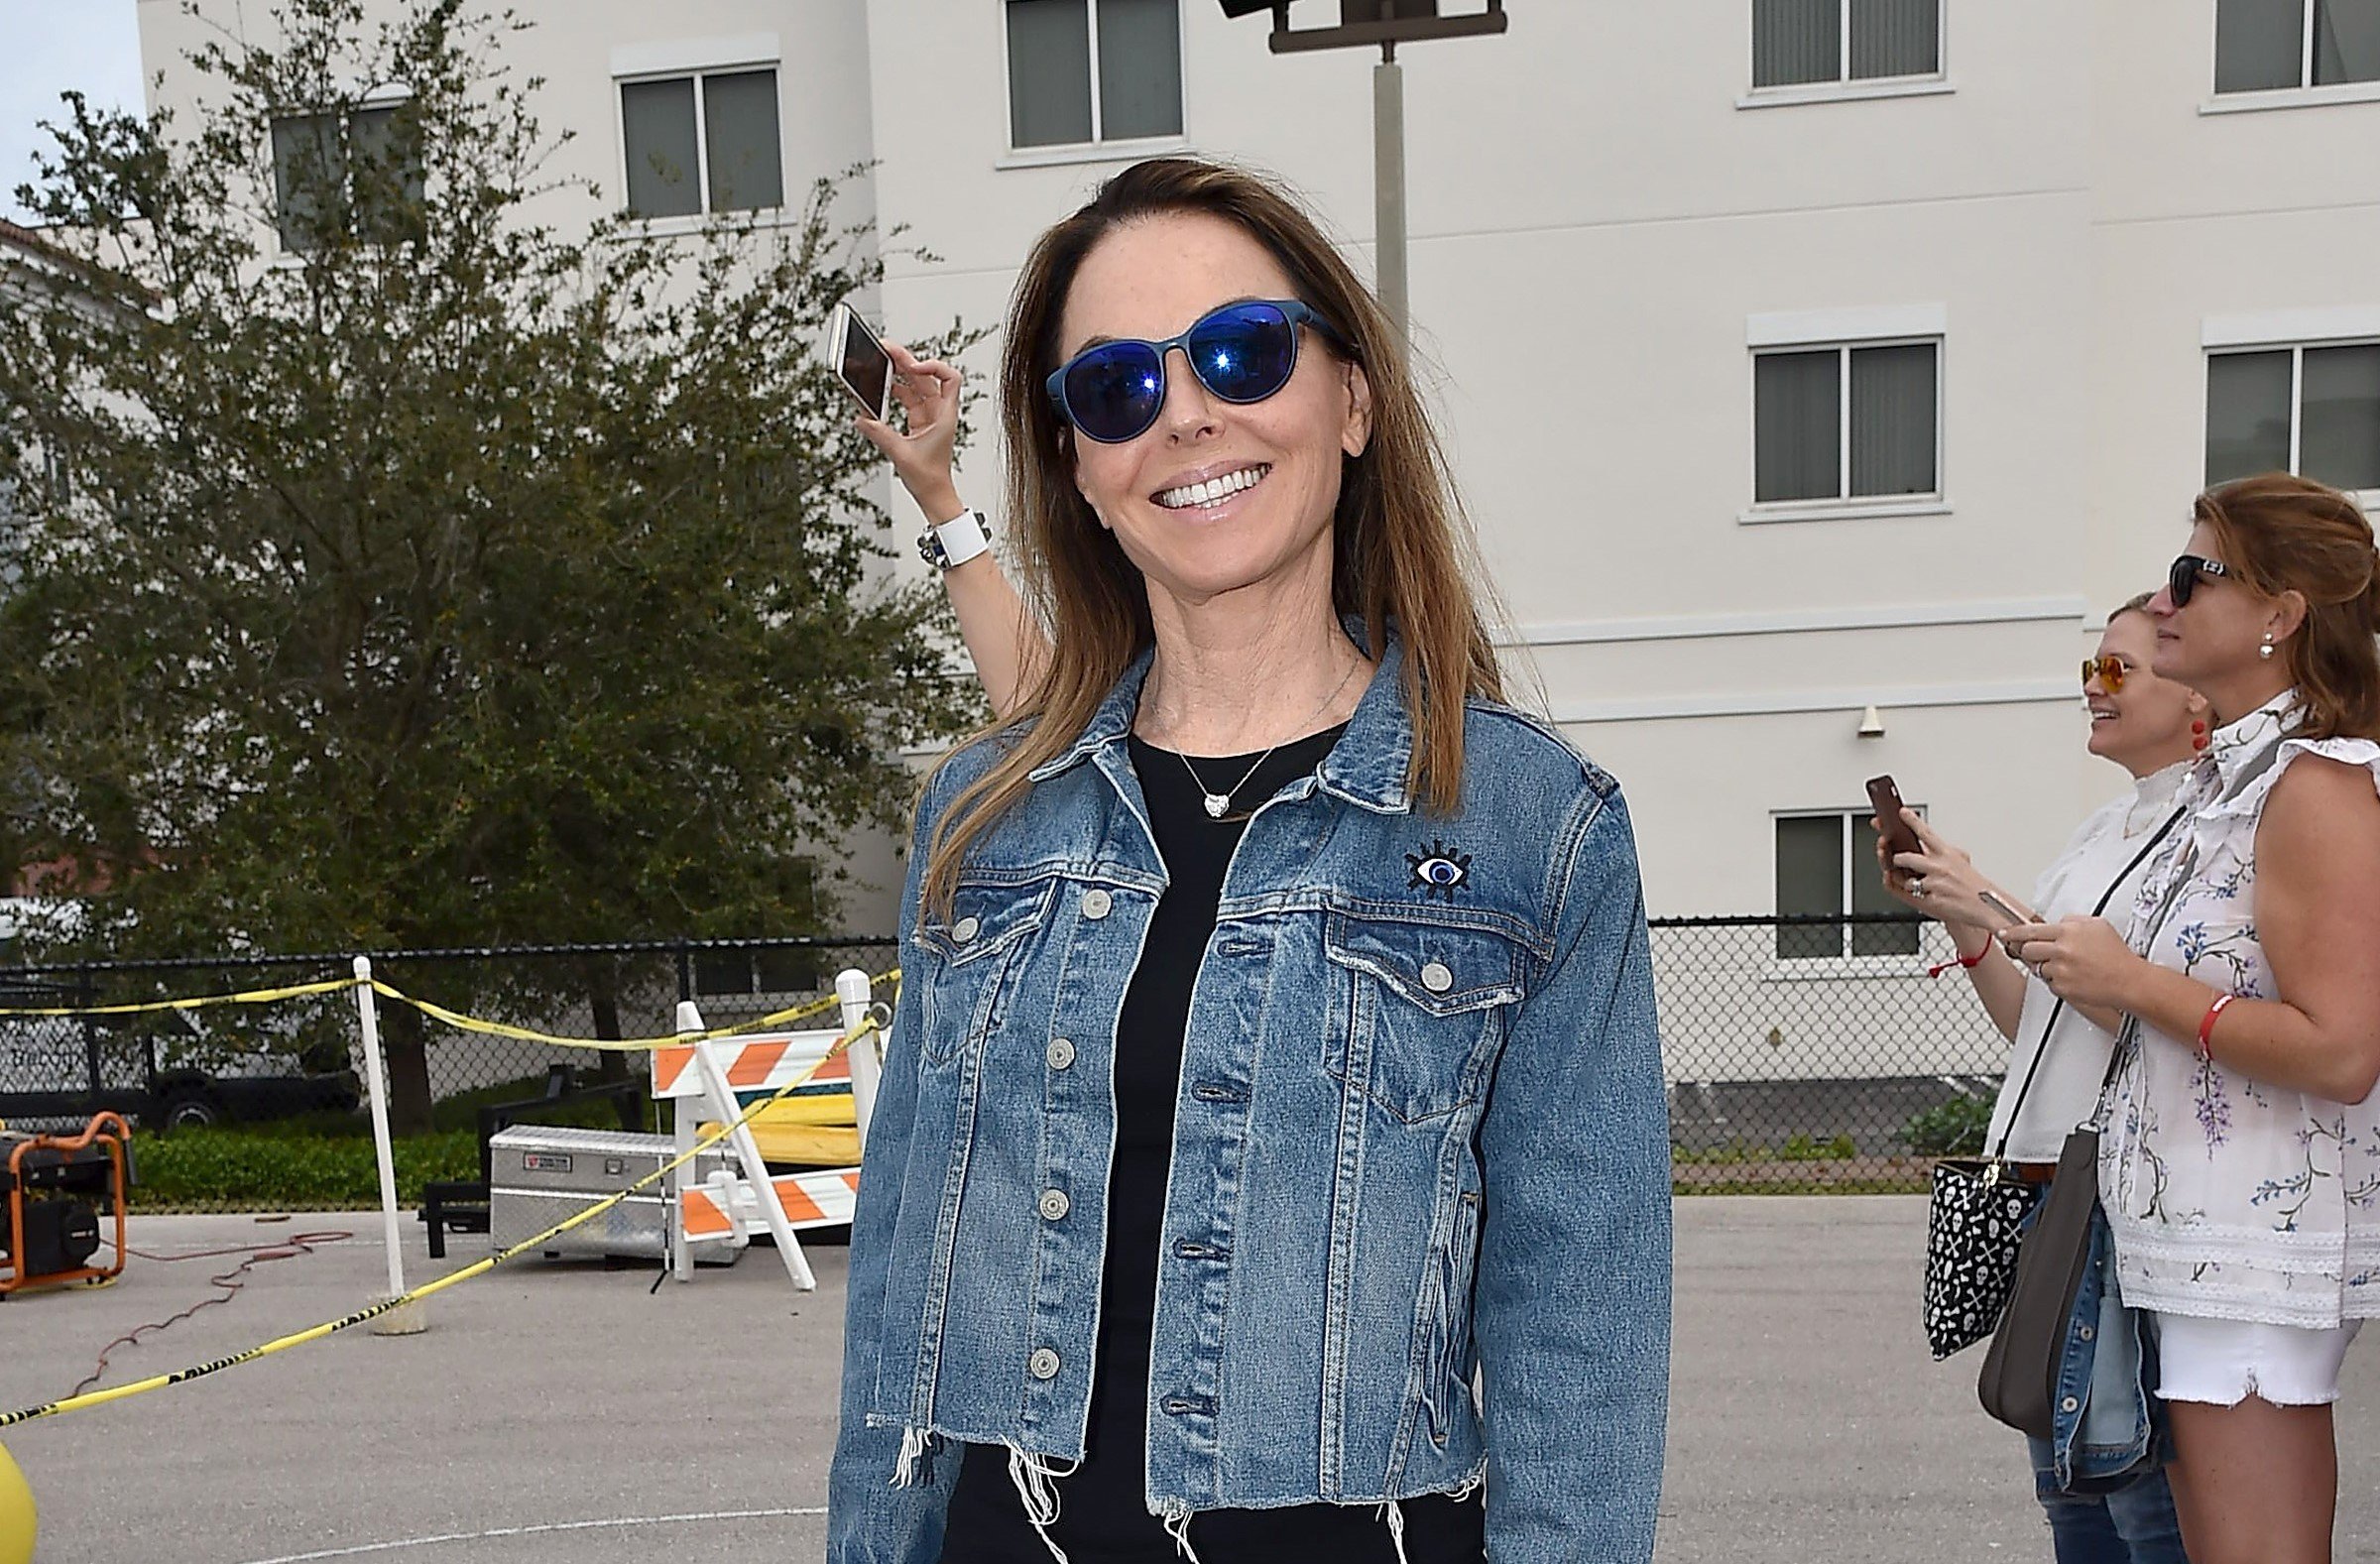  Bridget Koch attends Rosarian Academy Family Fun Day at Rosarian Academy on January 28, 2018, in West Palm Beach, Florida. | Source: Getty Images